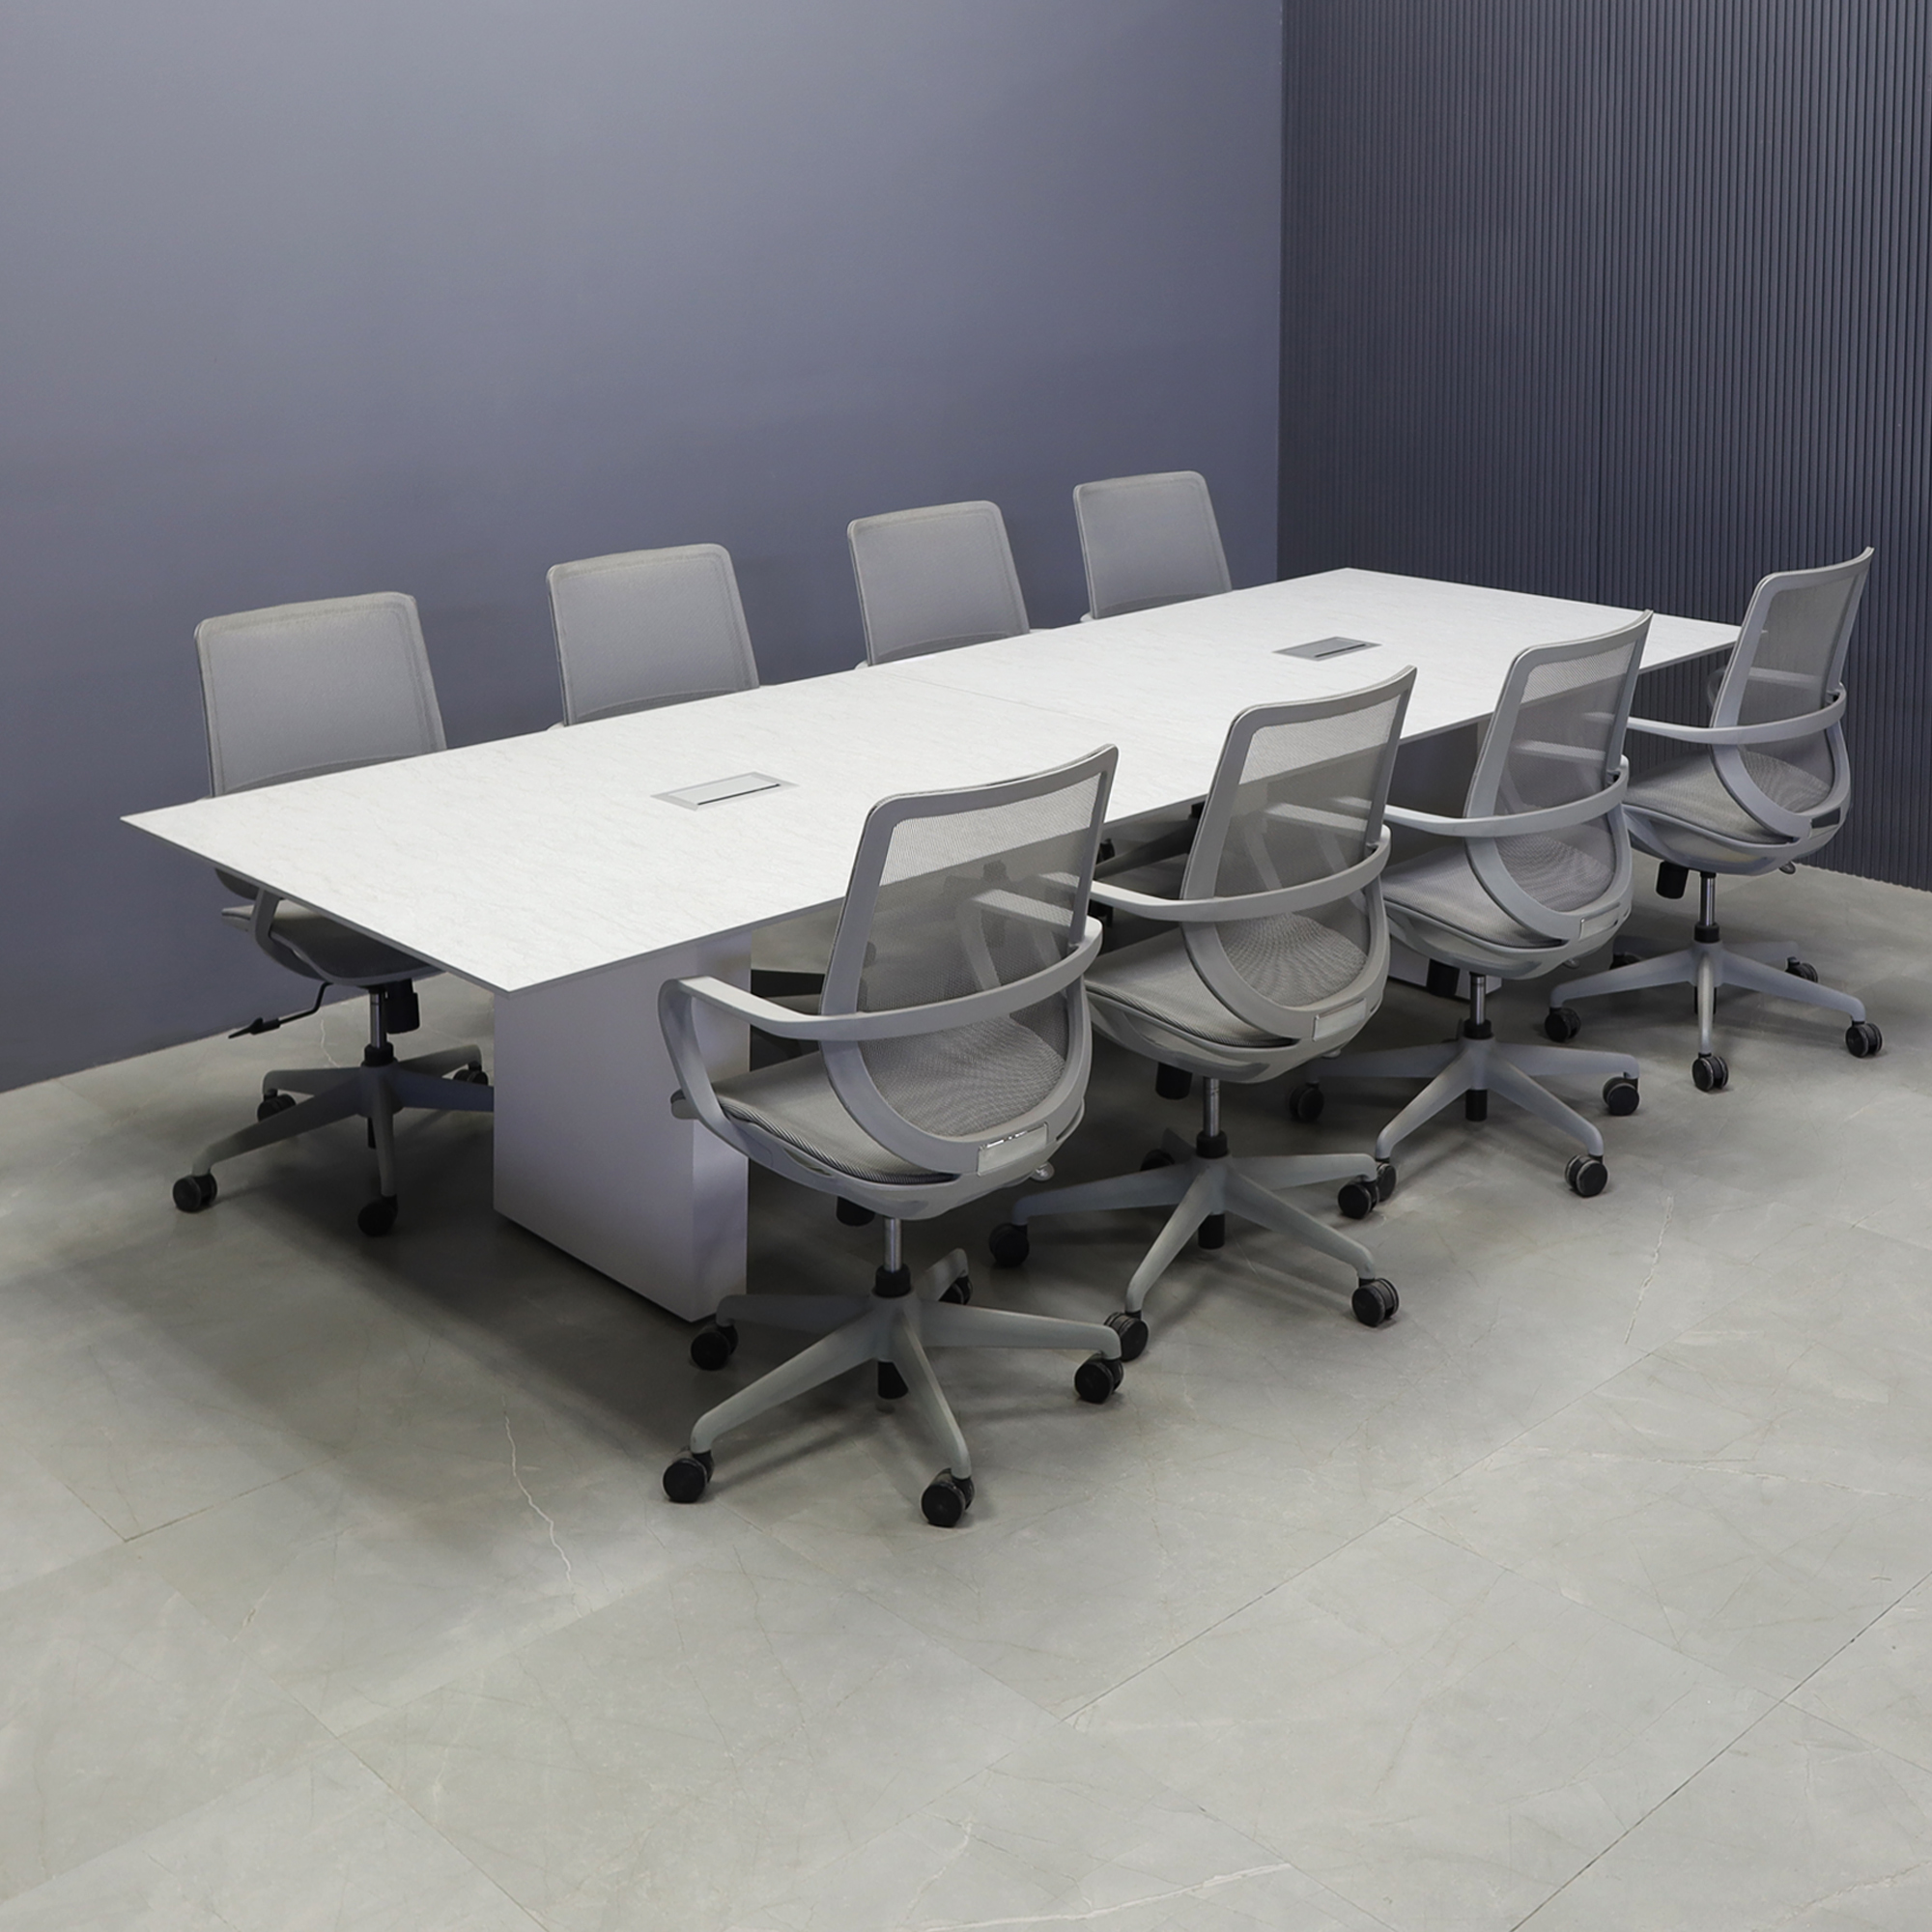 120 inches Aurora Rectangular Conference Table In spanish limestone engineered stone top with two elloras power box, and a dover off-white laminate base & legs shown here.